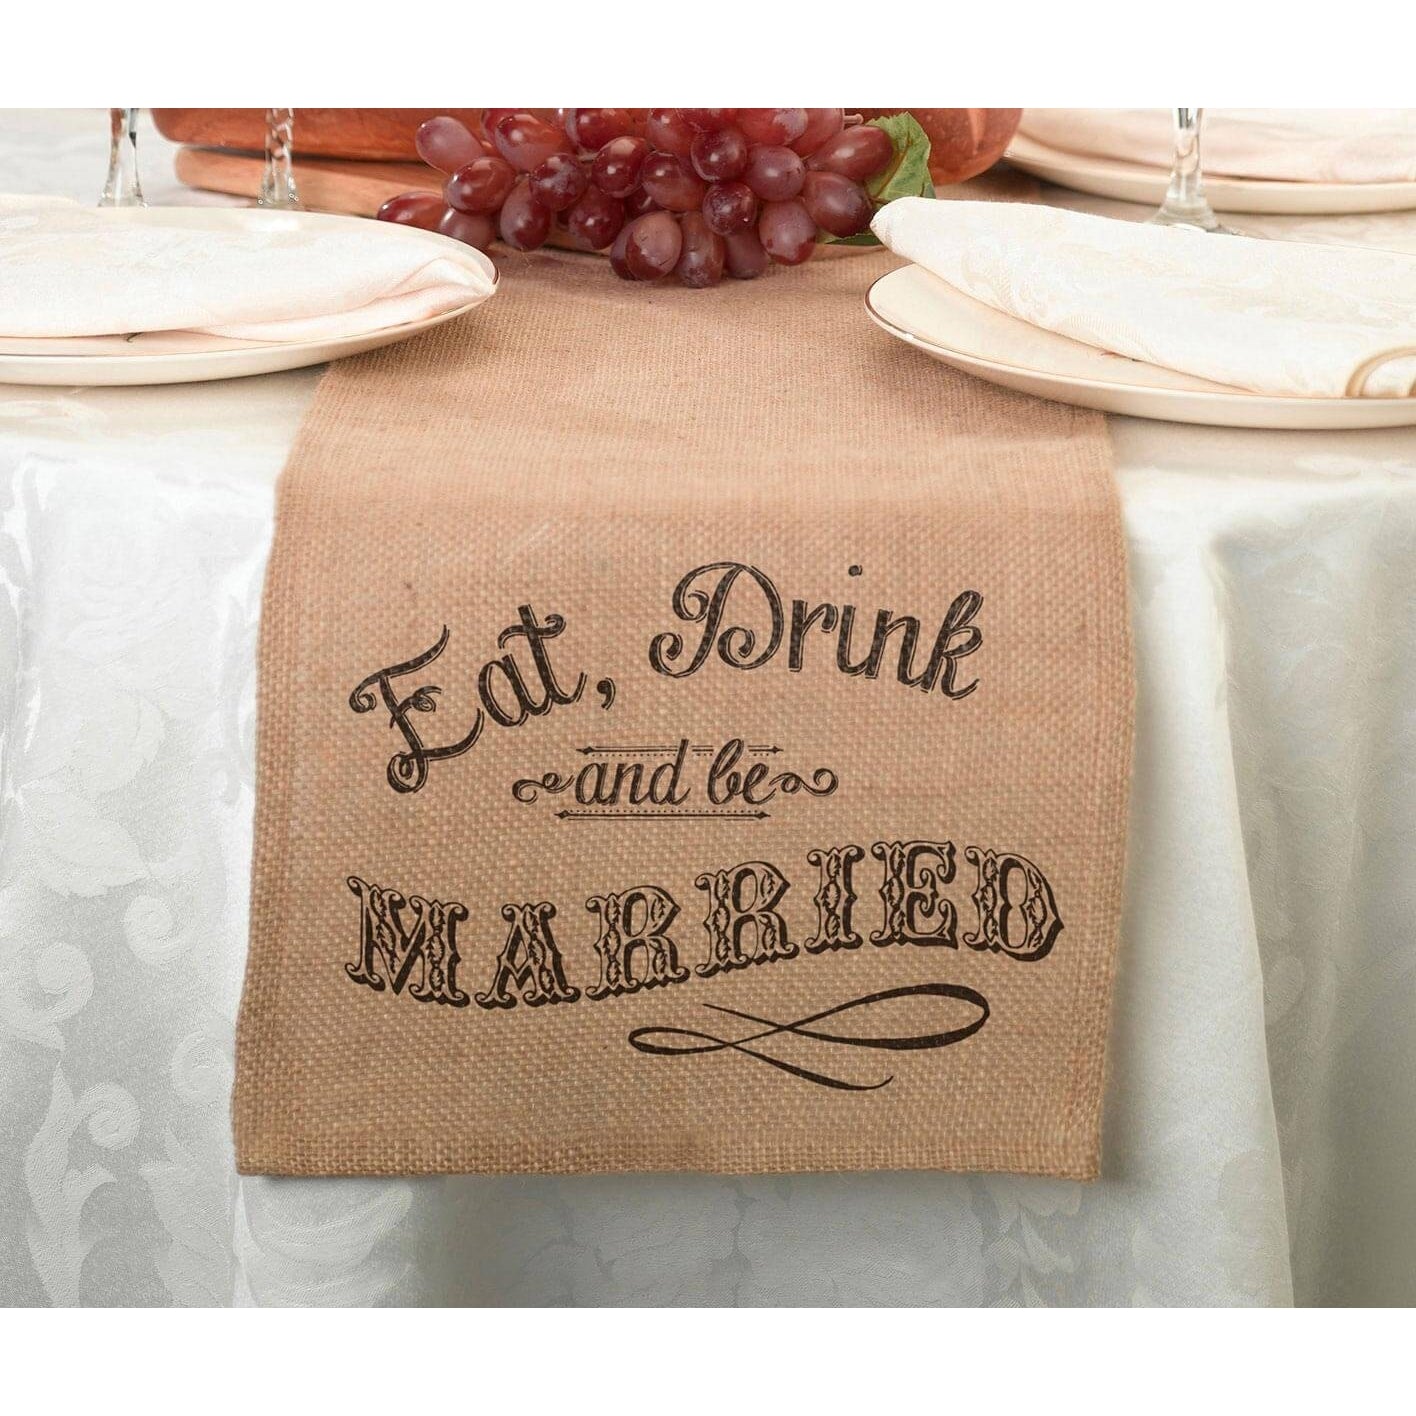 EAT DRINK BE MERRY TABLE RUNNER | Bridal Gift - Burlap Table Runner - Wedding Accessories - Minter and Richter Designs